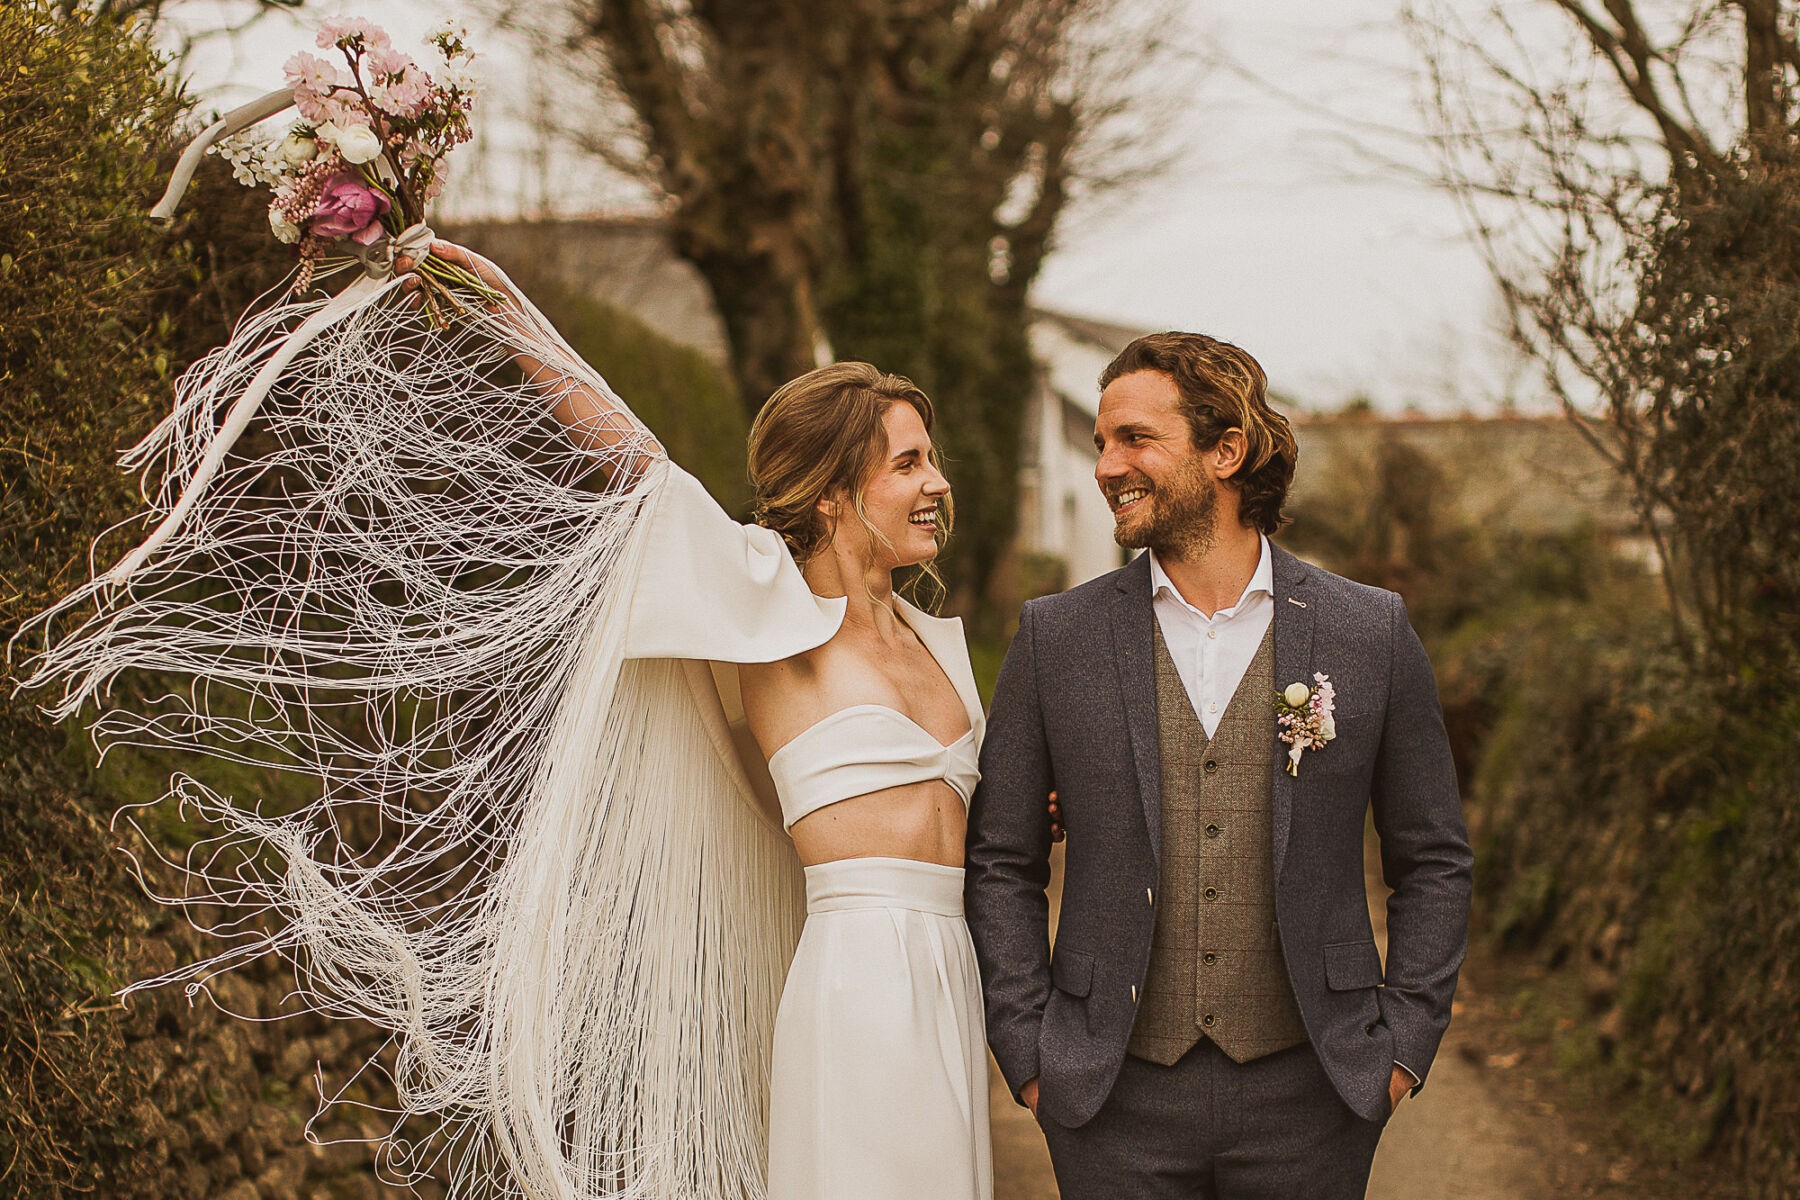 Escape to the country and to the coast: Intimate wedding inspiration at Cornish Place with Jesus Peiro and Anna Kara